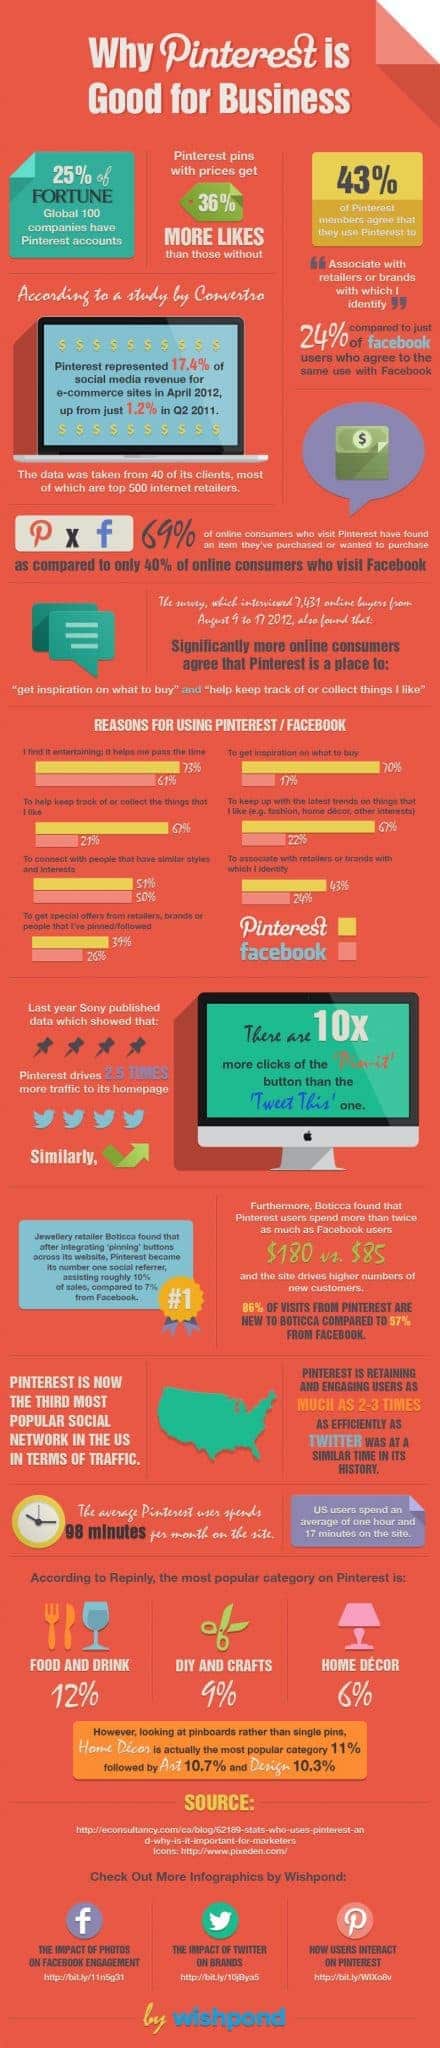 infographic on why pinterest is good for business